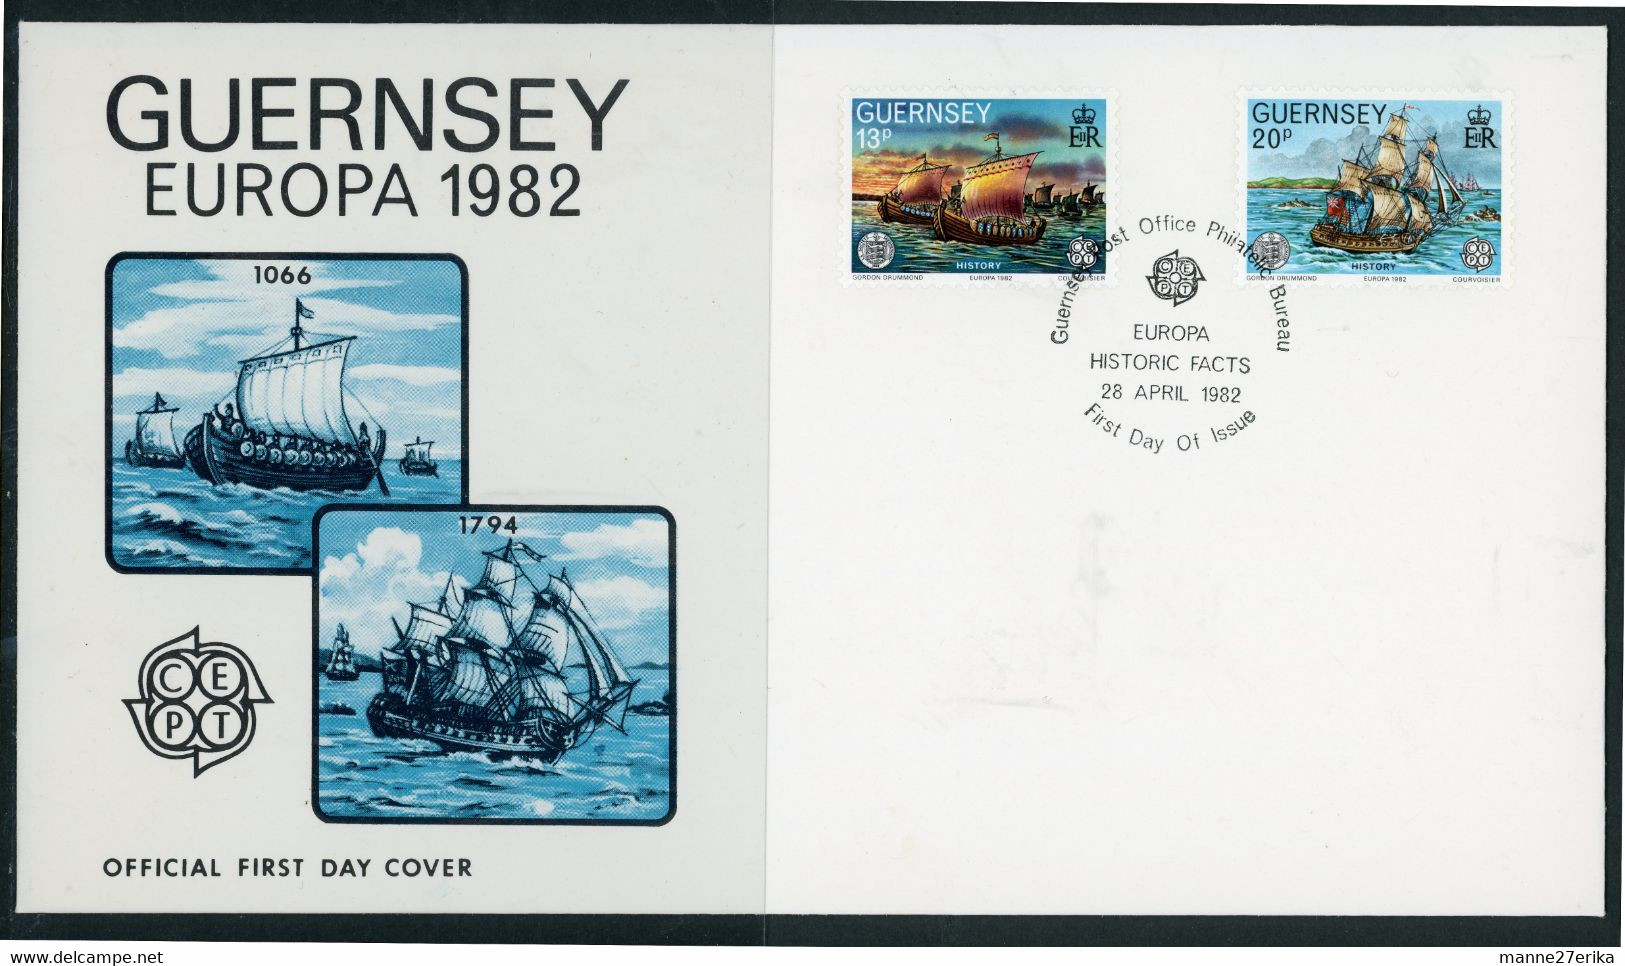 Guernsey FDC 1982 - Guernesey